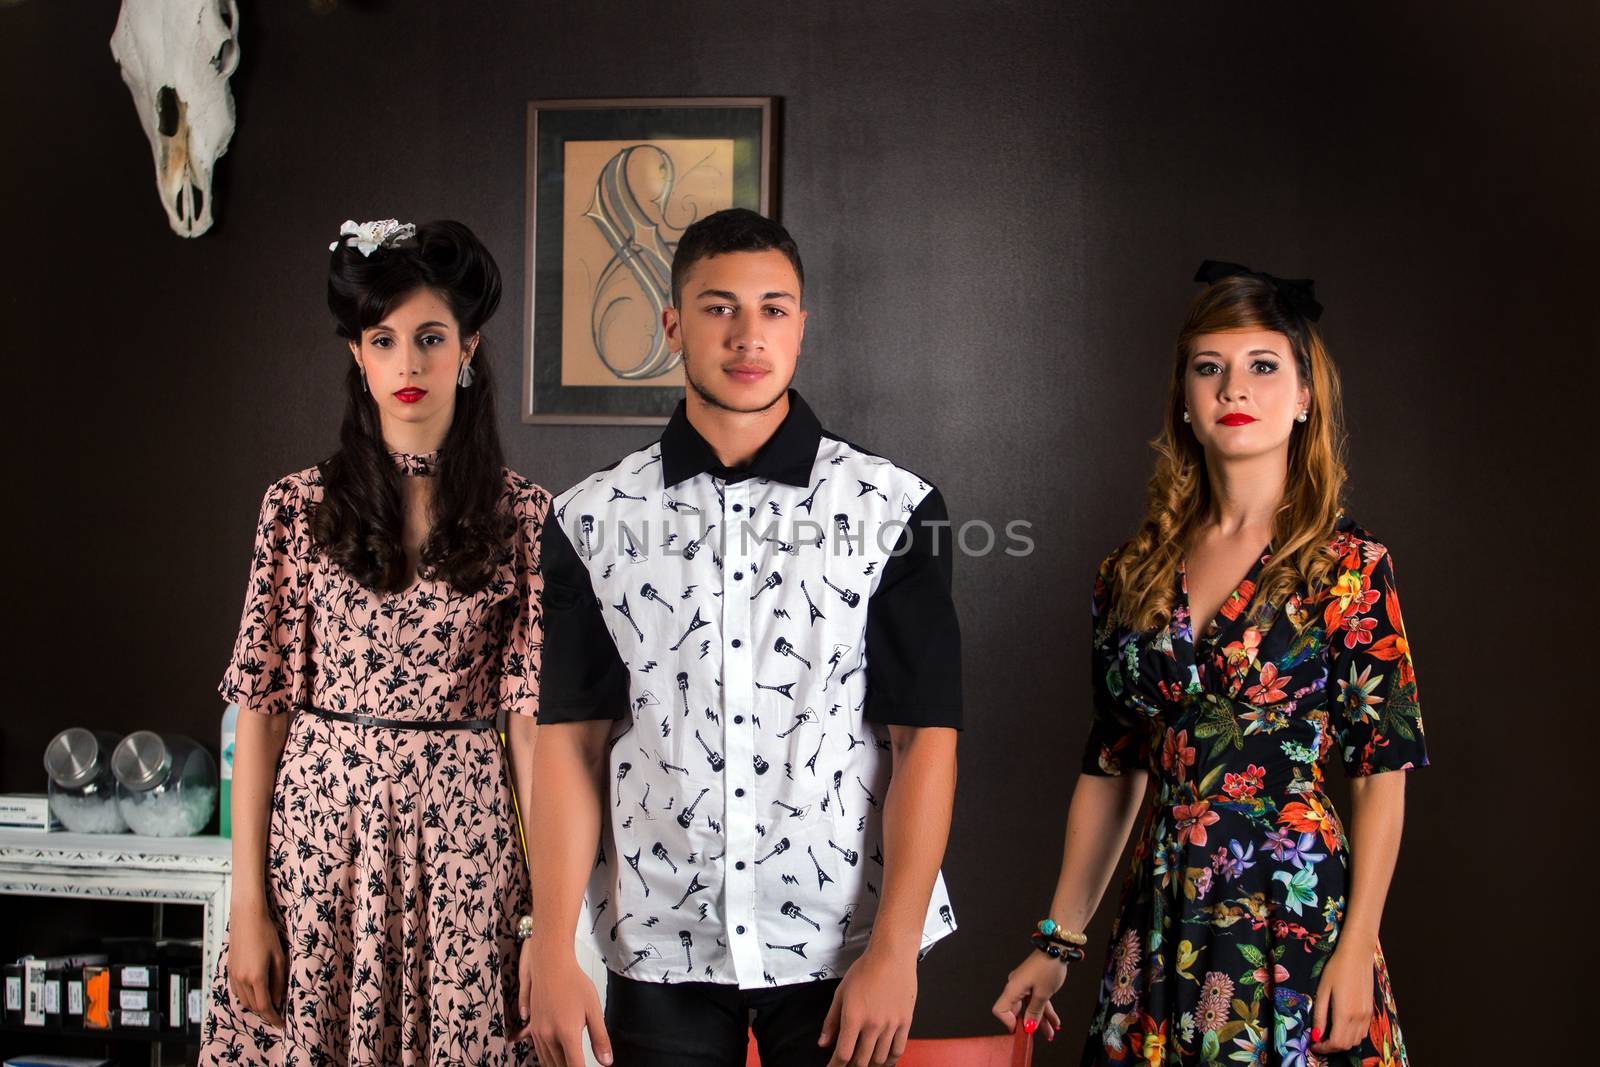 Two woman and a man posing on a vintage style retro clothing.